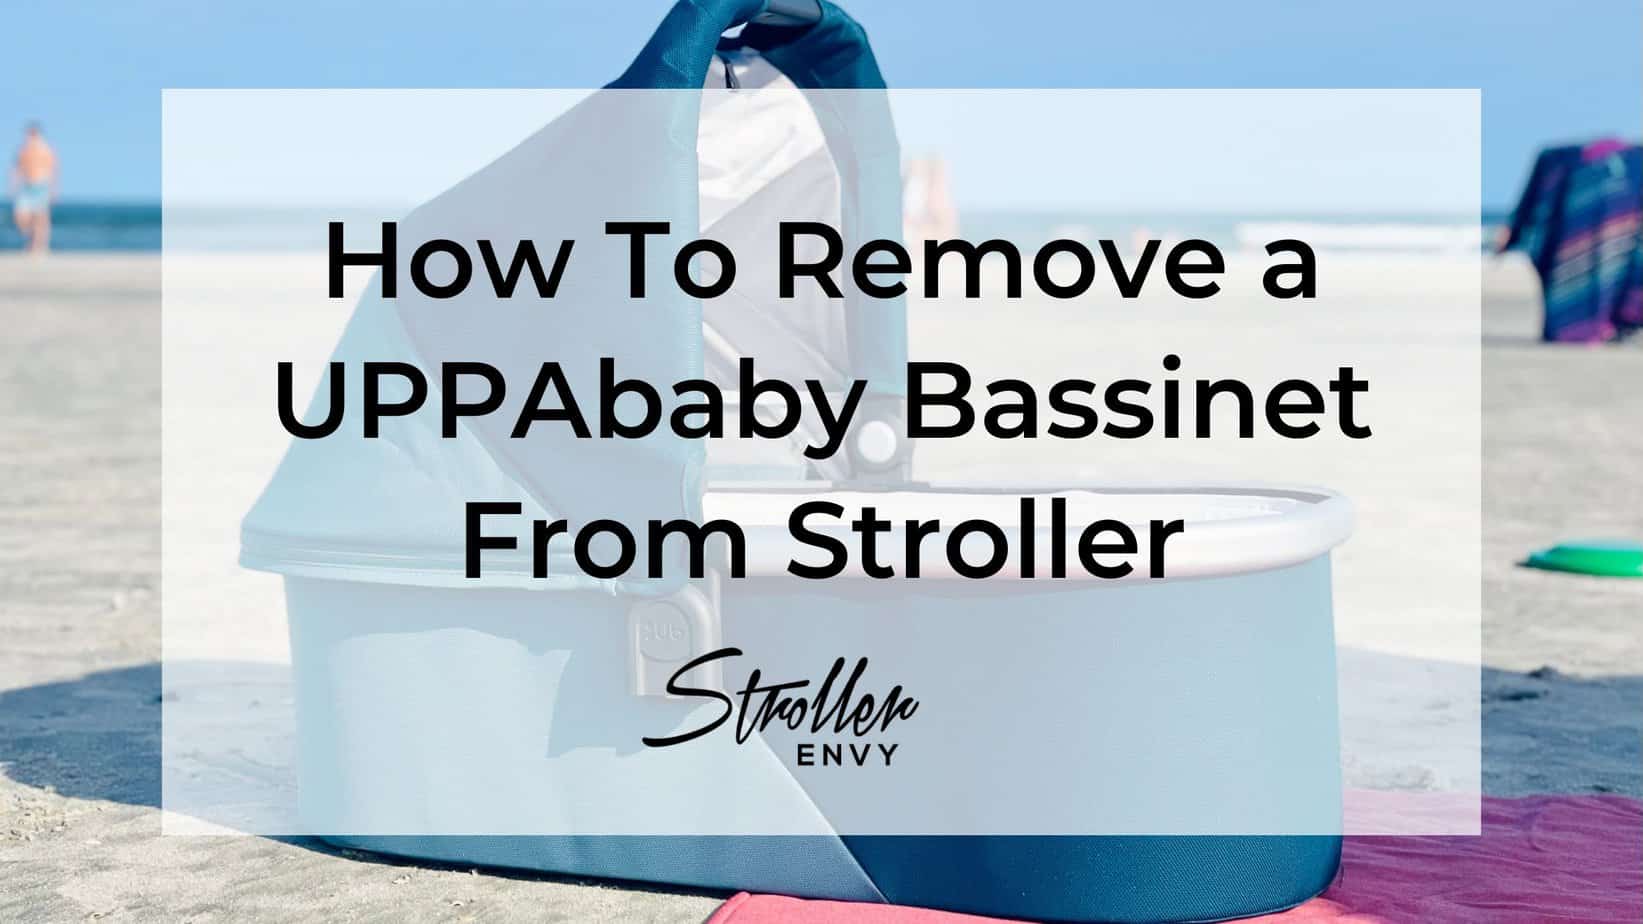 How To Remove a UPPAbaby Bassinet From Stroller